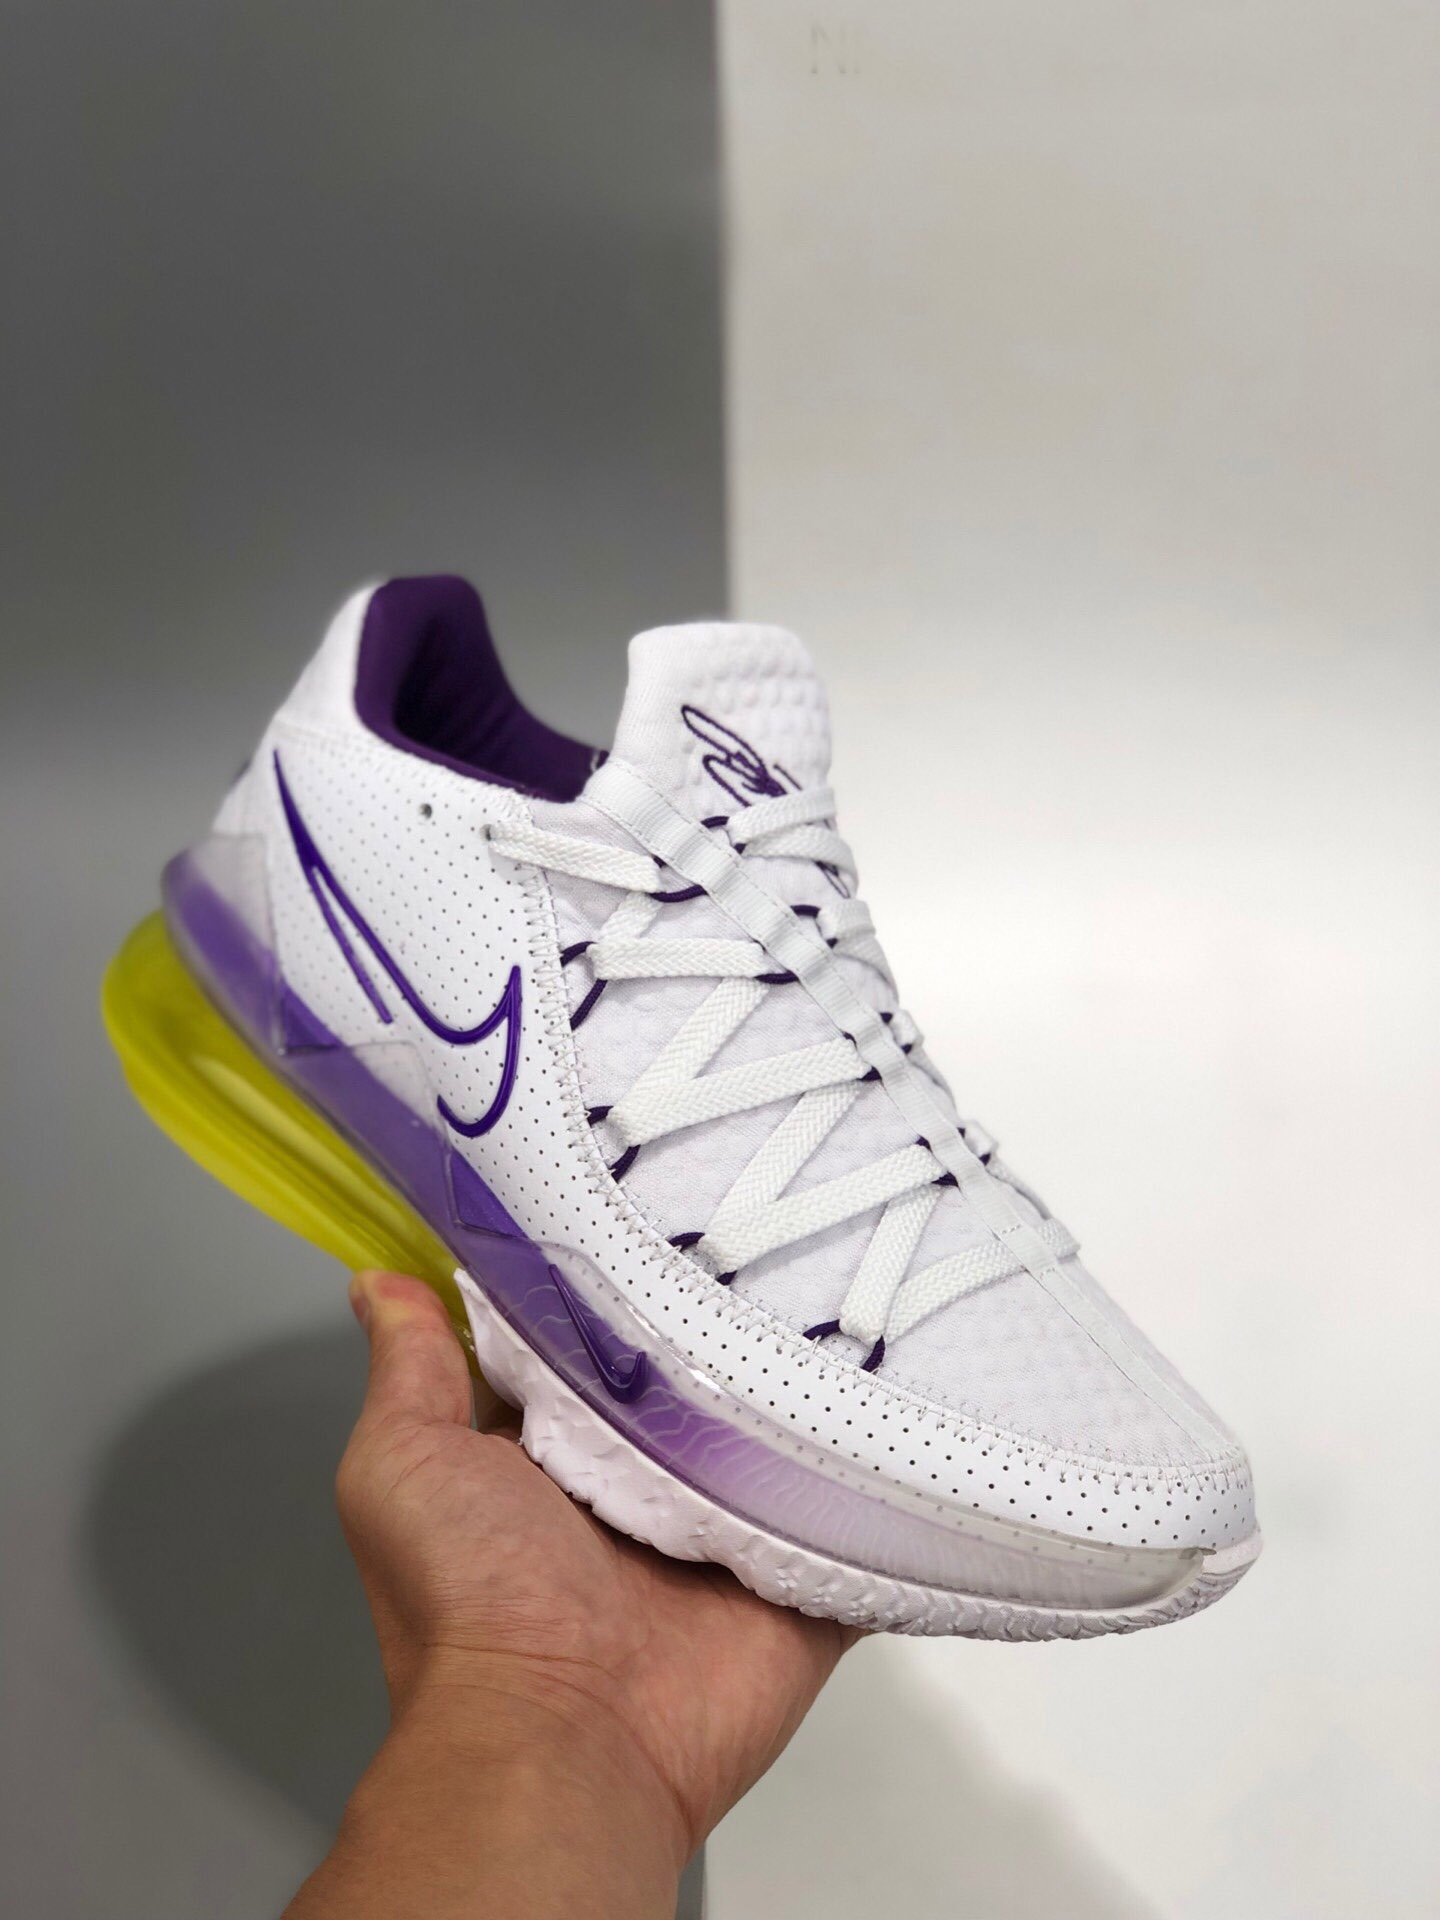 LAKER NATION. LeBron 17 low Lakers home : r/Nike